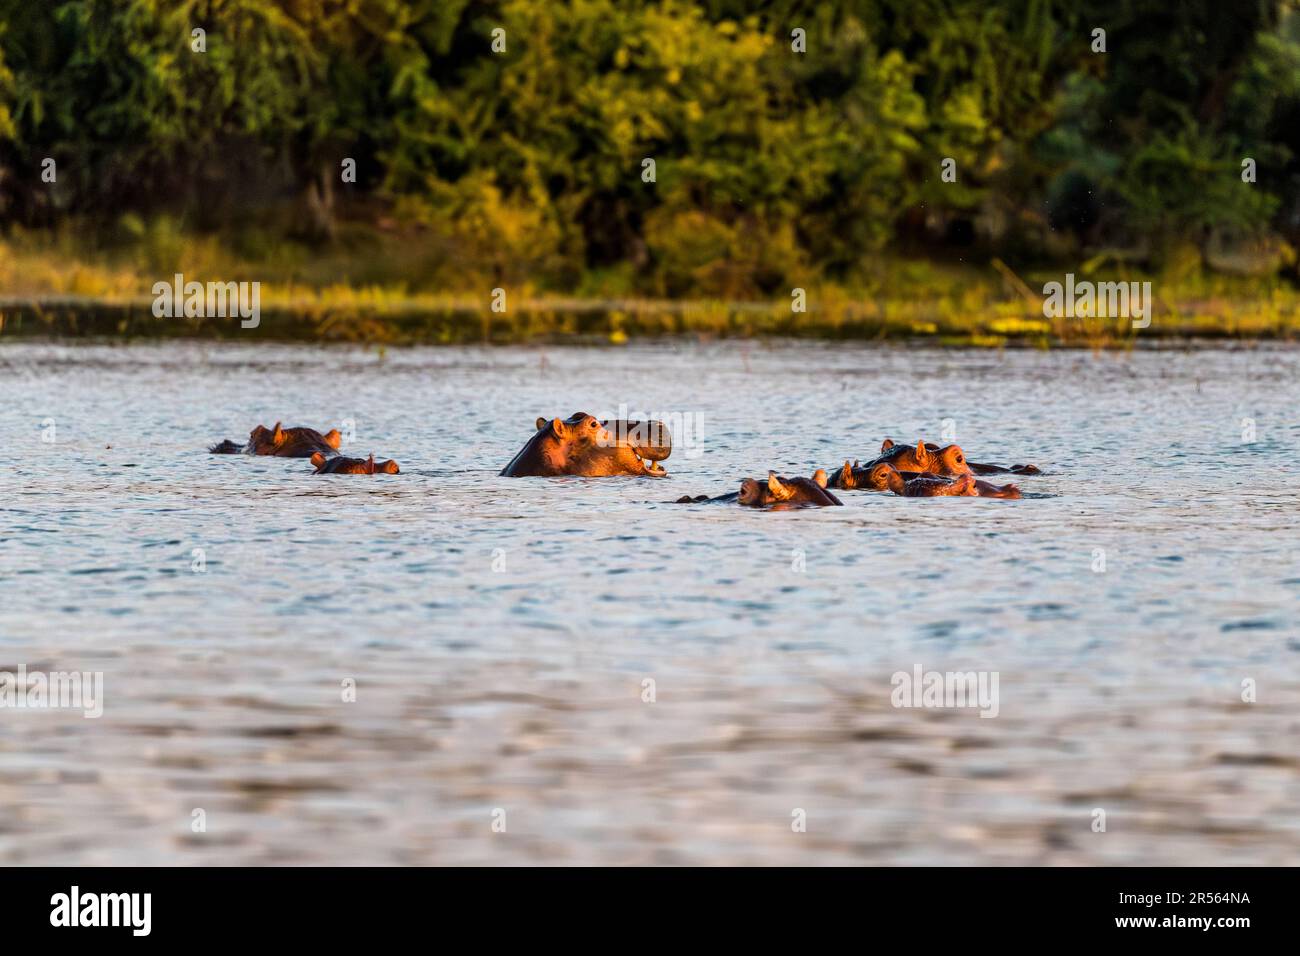 Evening atmosphere with Hippos on the Shire River. Liwonde National Park, Malawi Stock Photo